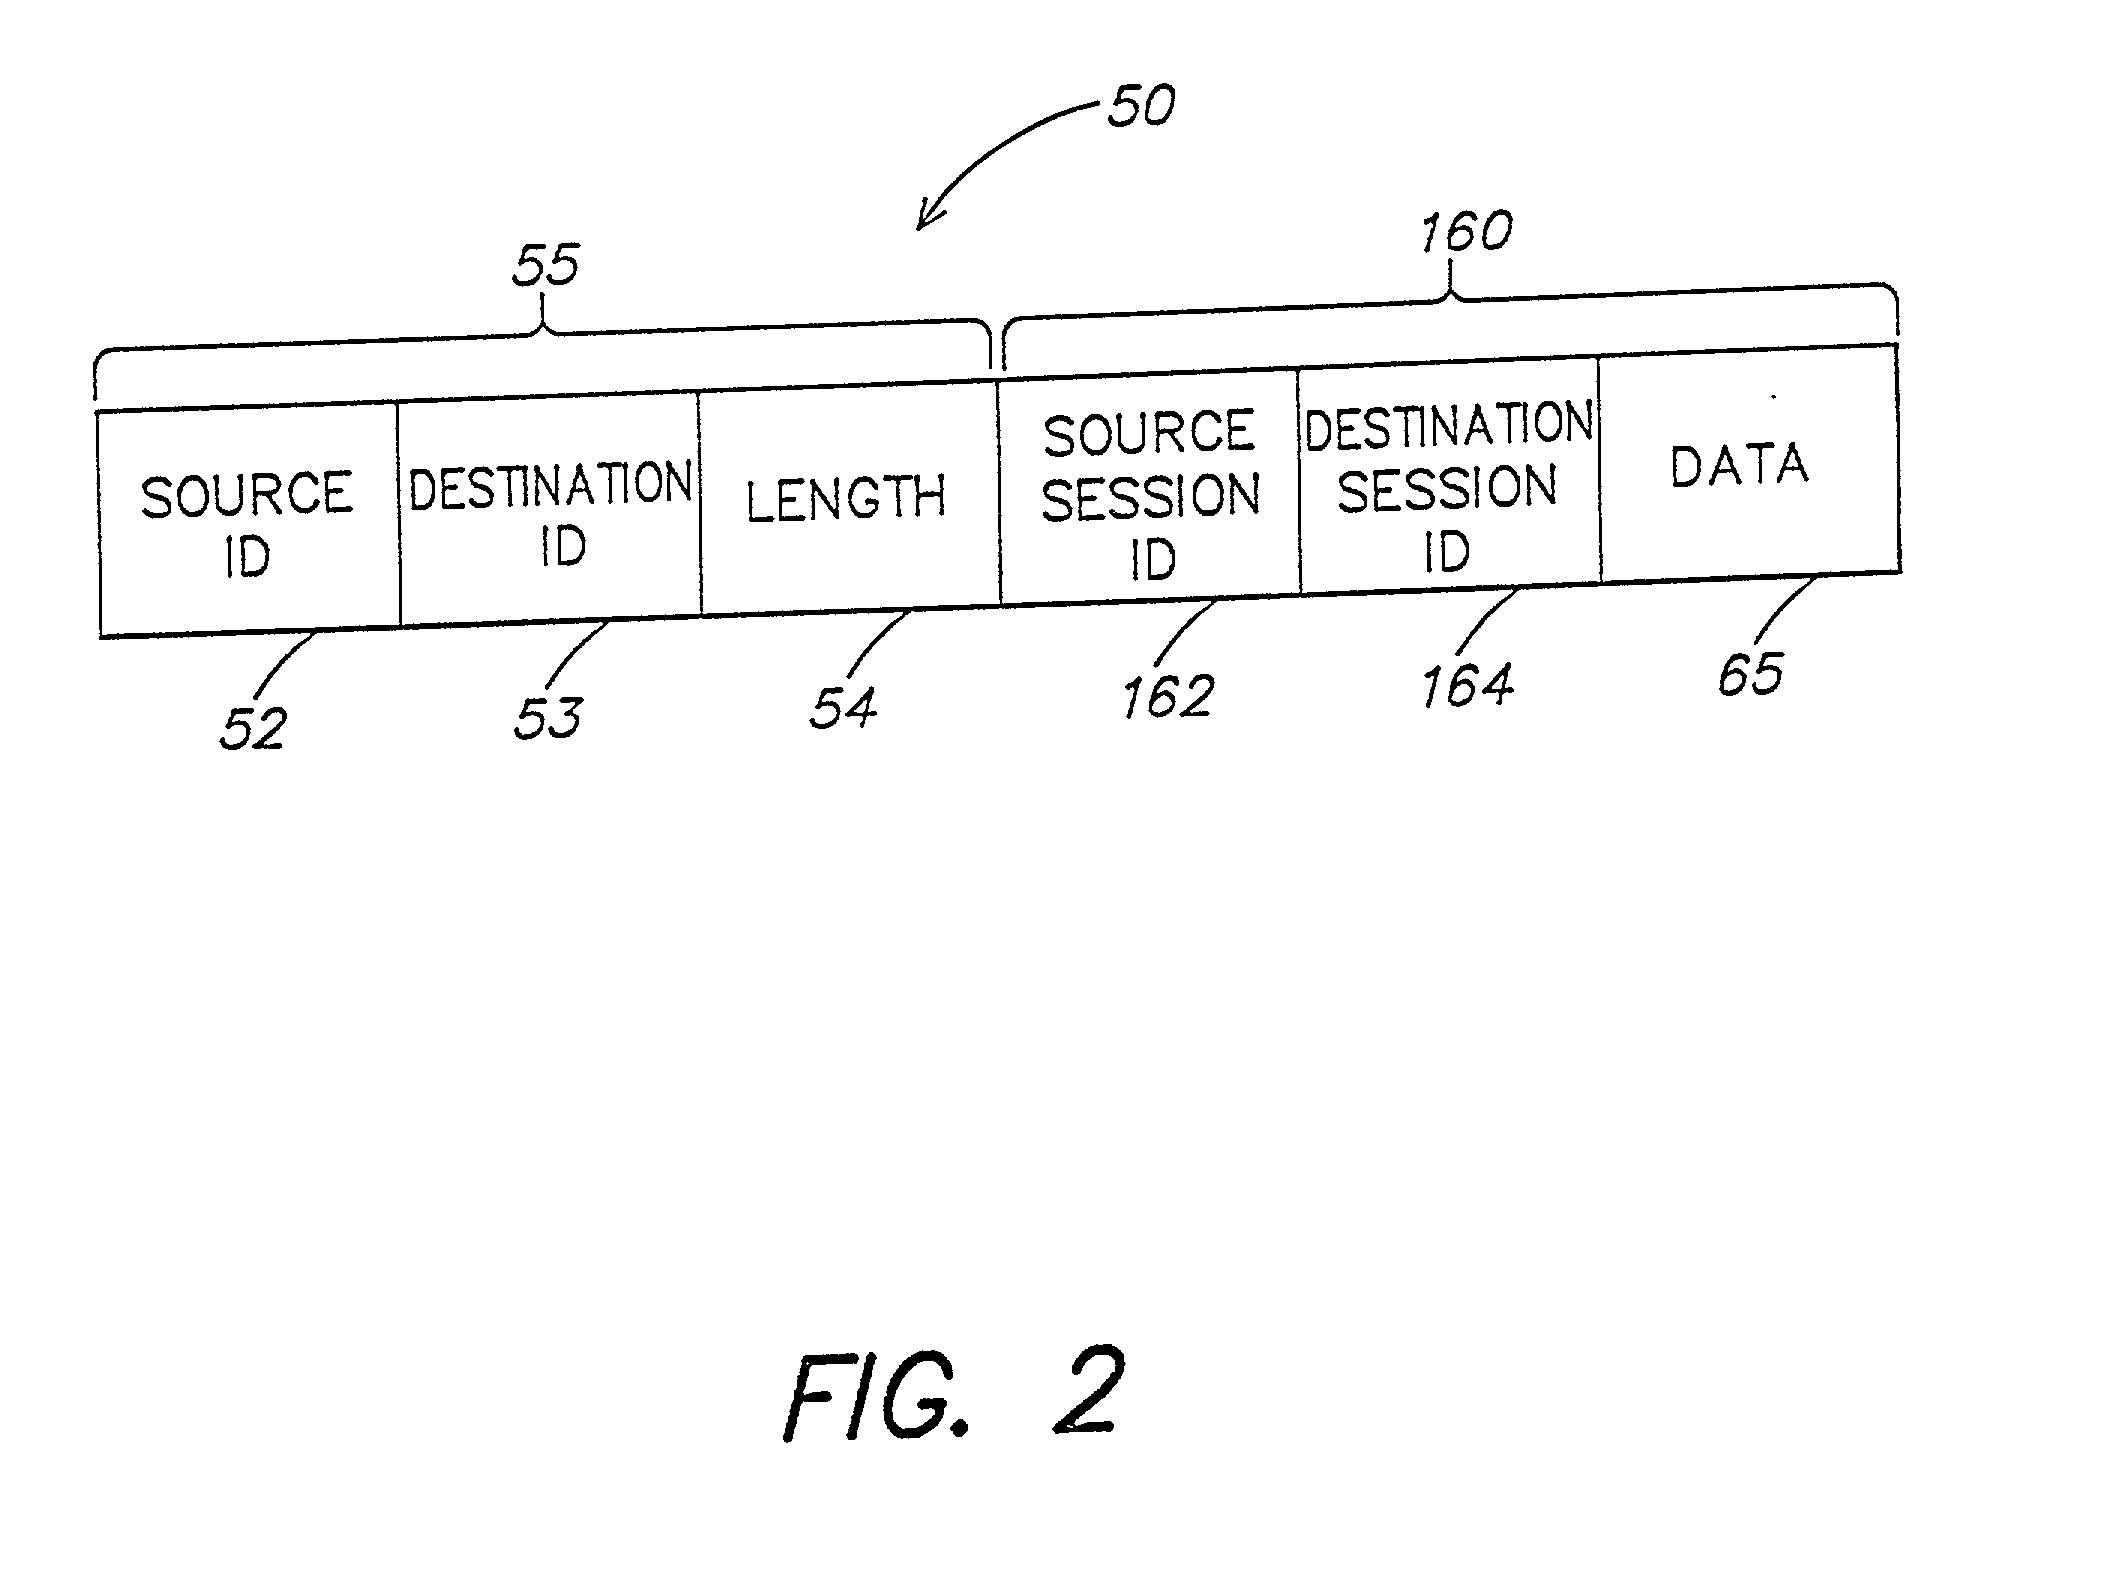 Method and apparatus for managing access to storage devices in a storage system with access control